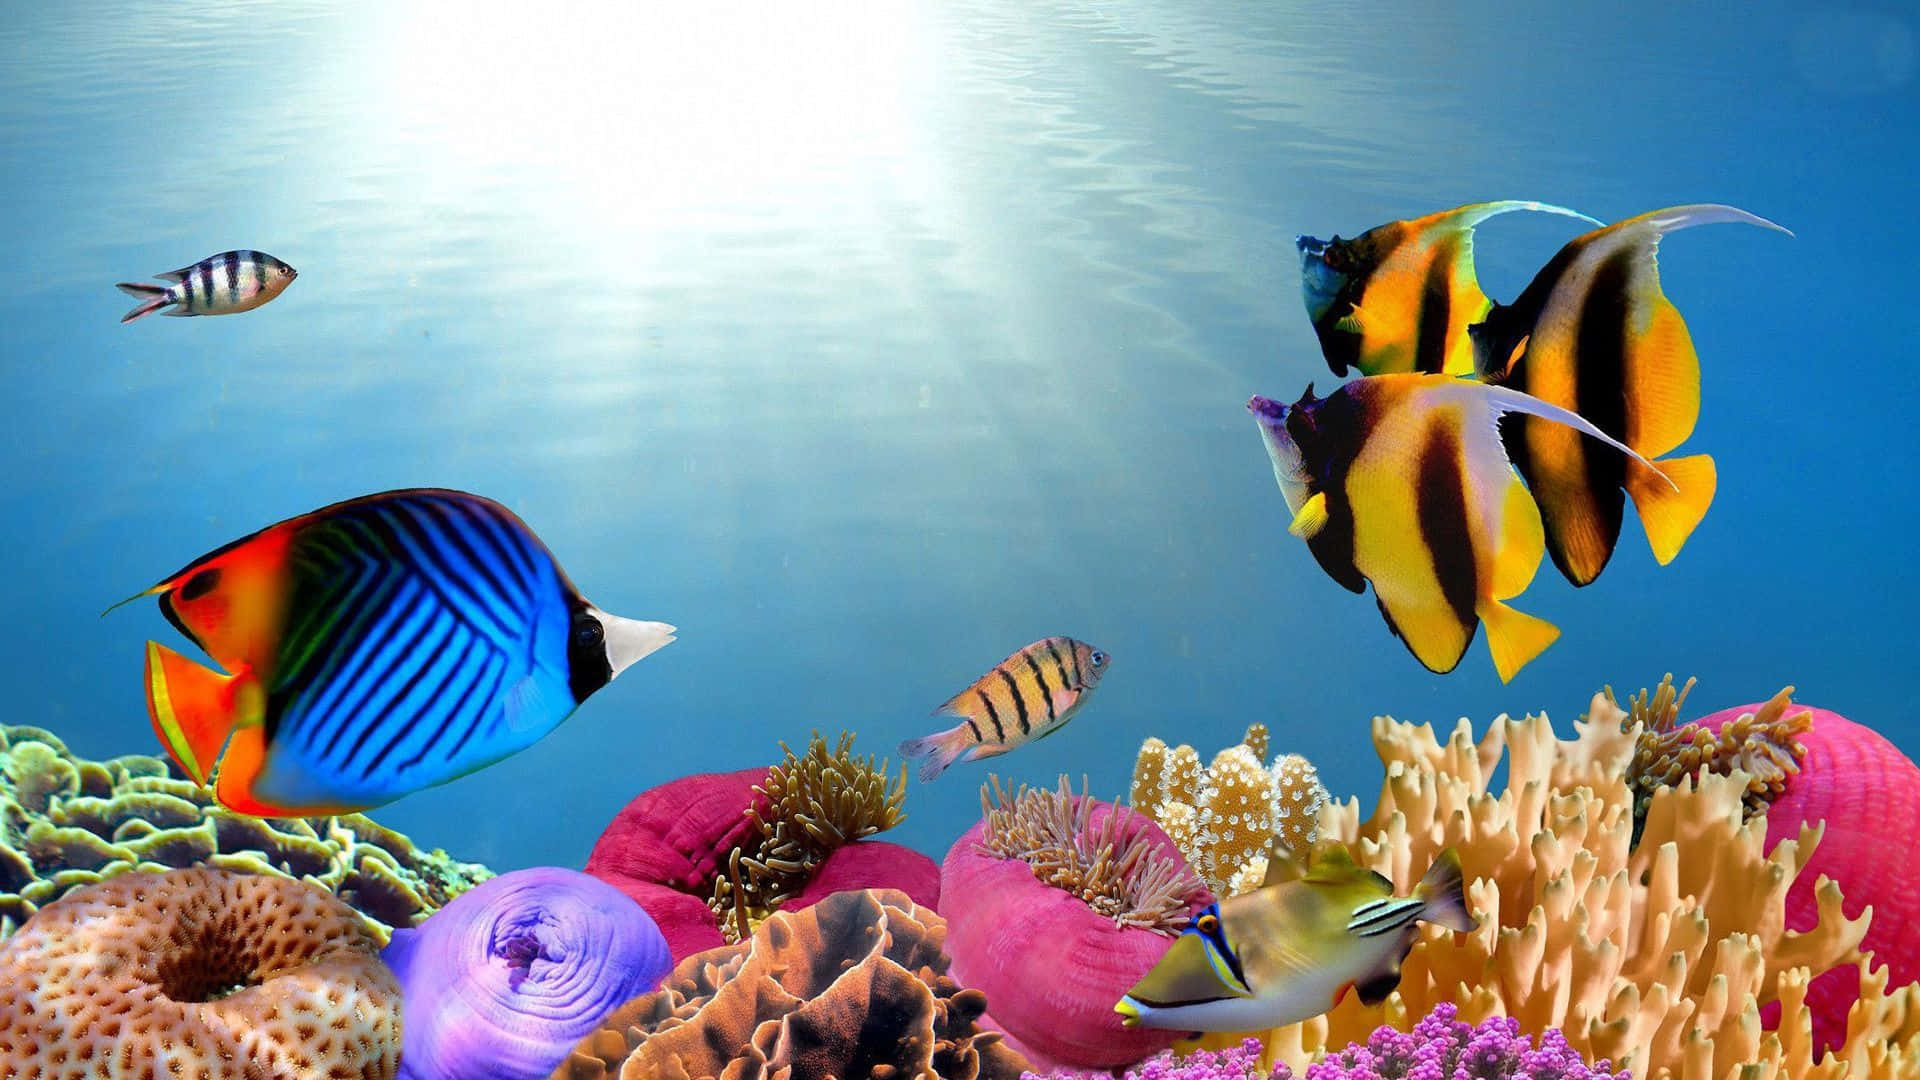 A Colorful Underwater Scene With Fish And Corals Wallpaper